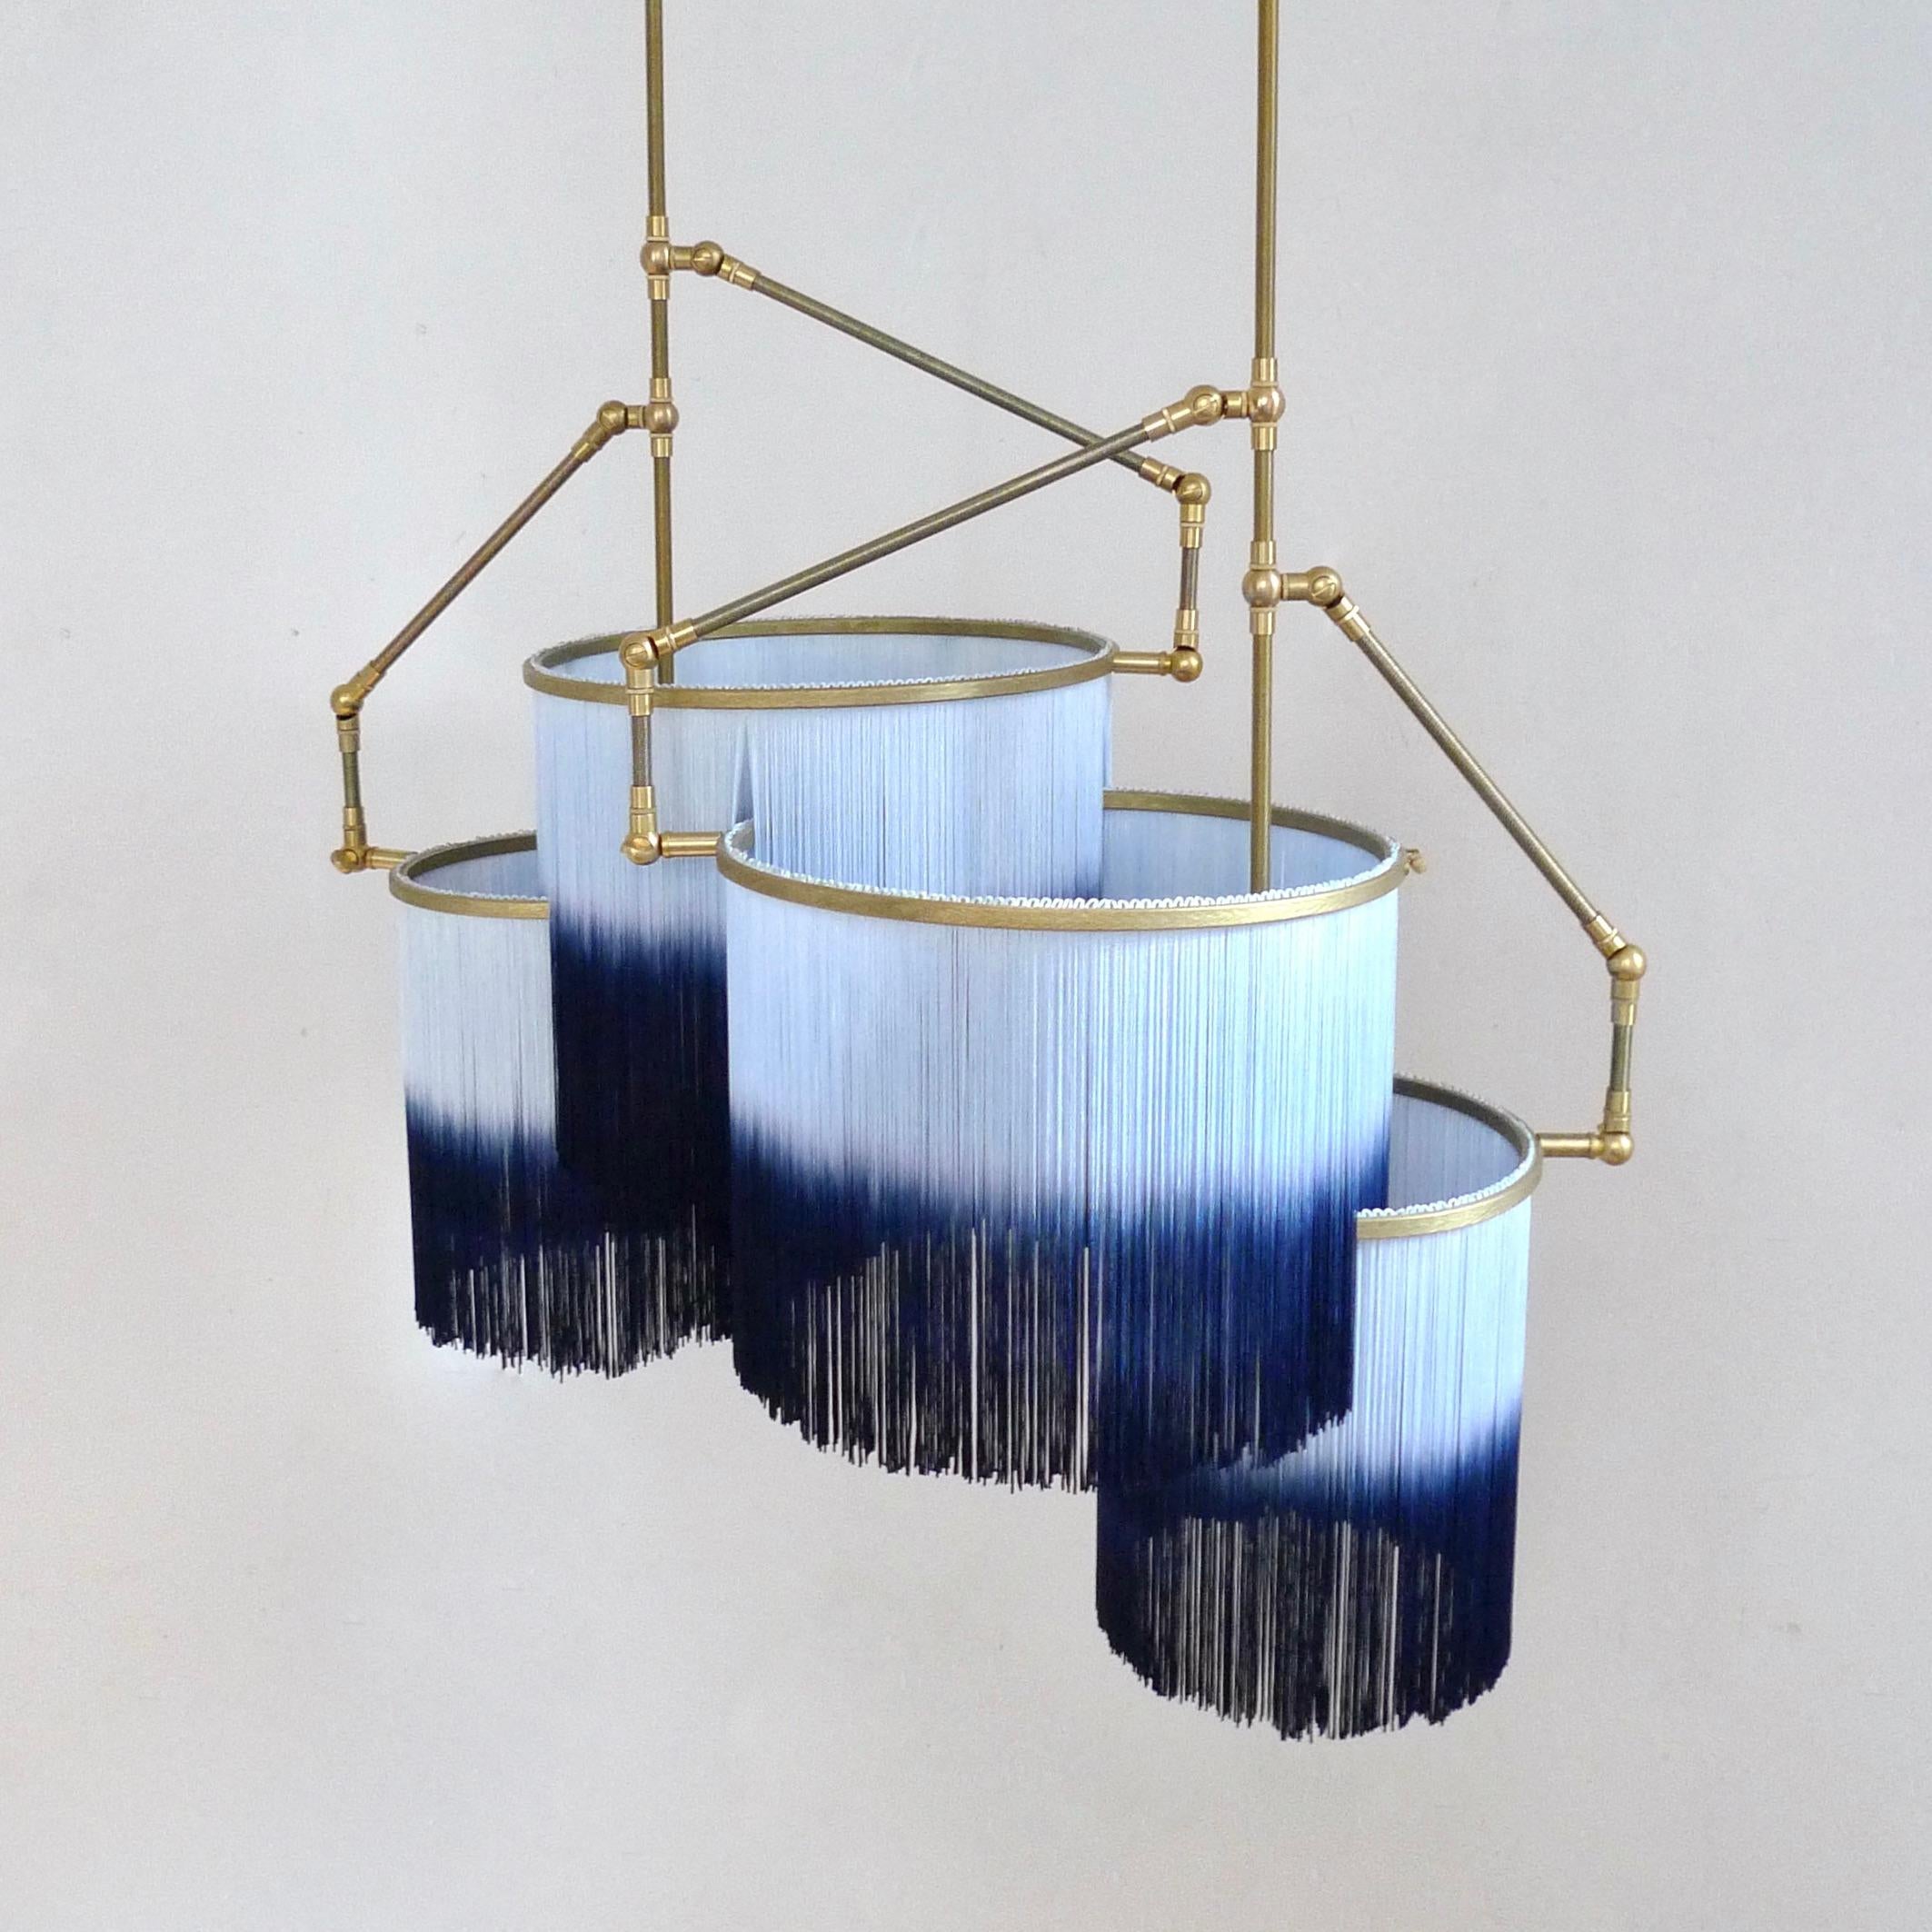 No. 31 C pendant lamp by Sander Bottinga
Dimensions: W 68 x D 44 x H 50 cm.
Materials: brass, leather, wood. Deep dyed color fringes in viscose.

Also available in dark yellow and light yellow, green and light green, blue and light blue, reddish